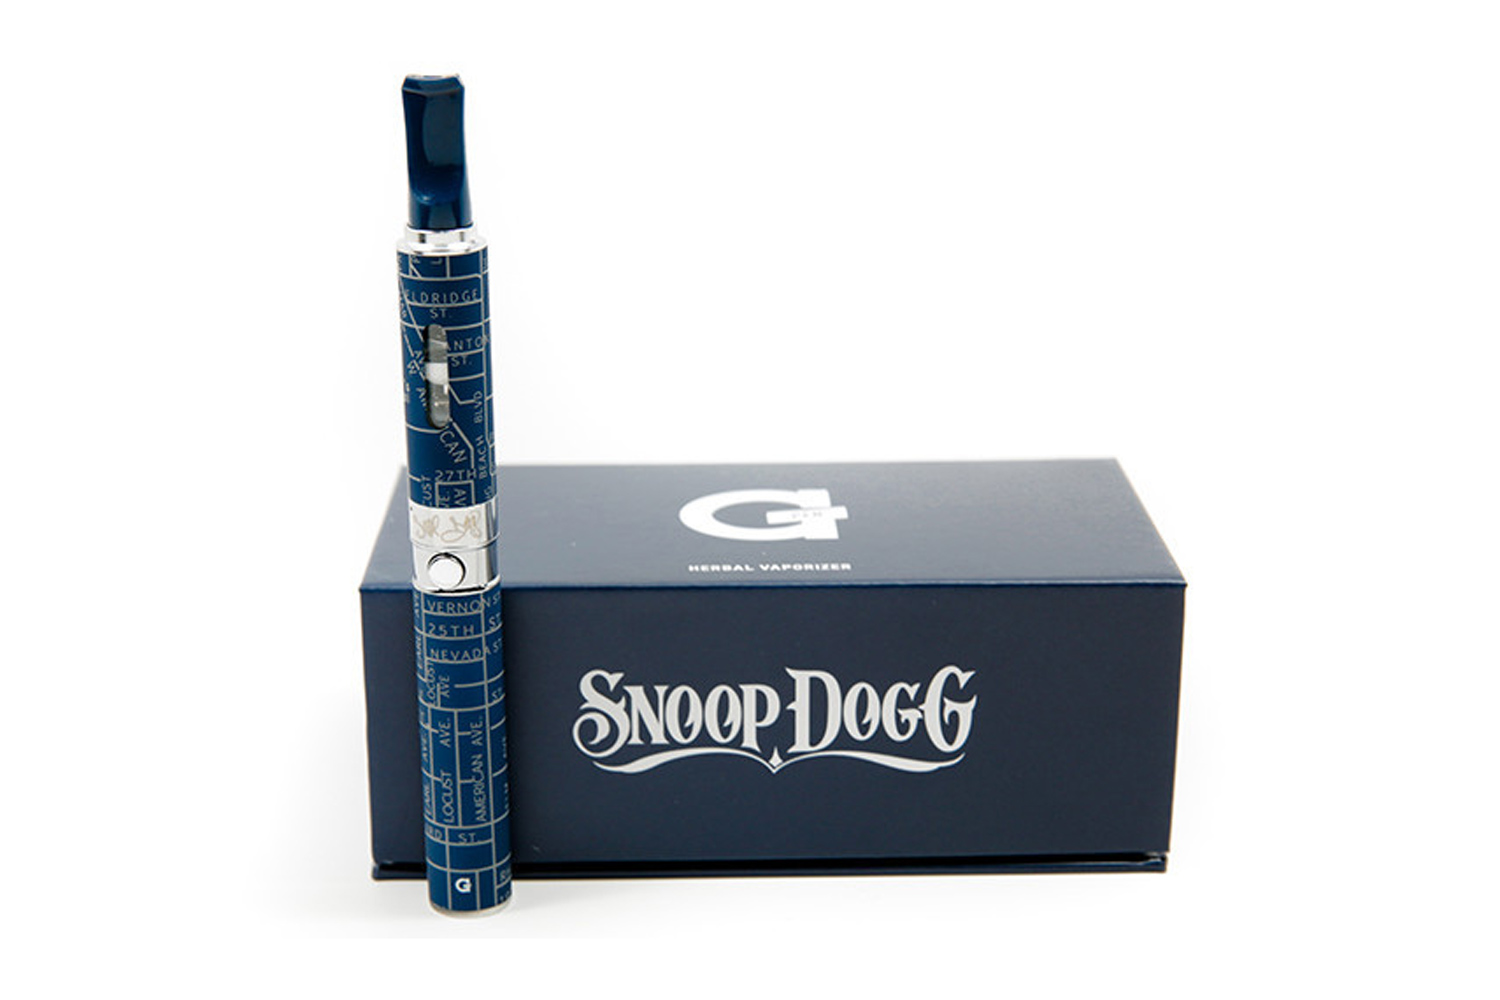 Snoop Dogg G Pen vaporizer from Grenco Science